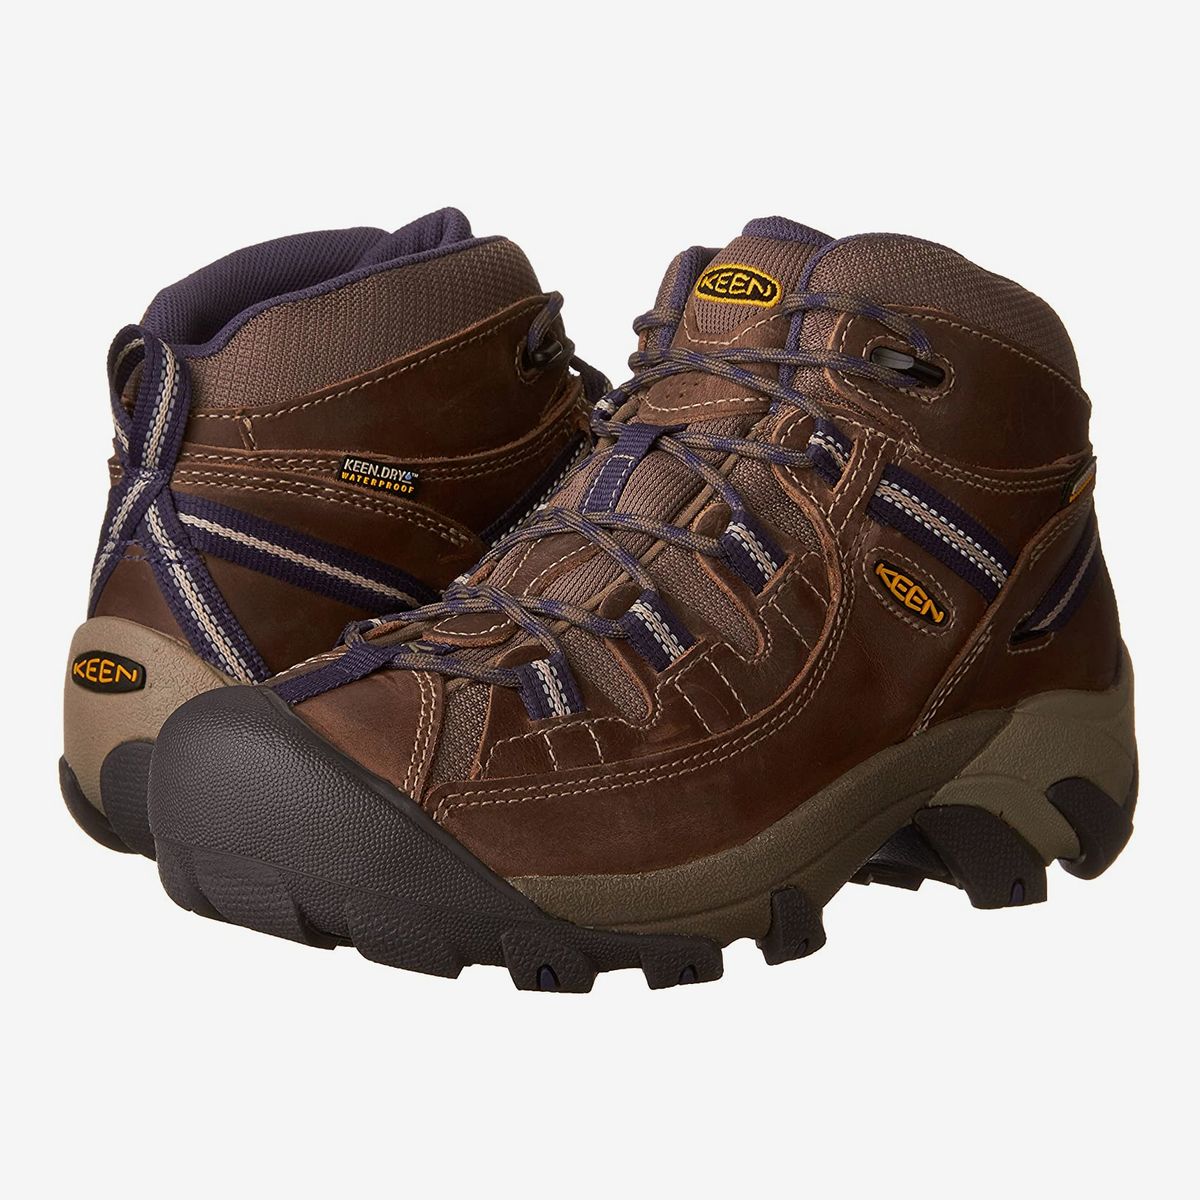 places to buy hiking boots near me